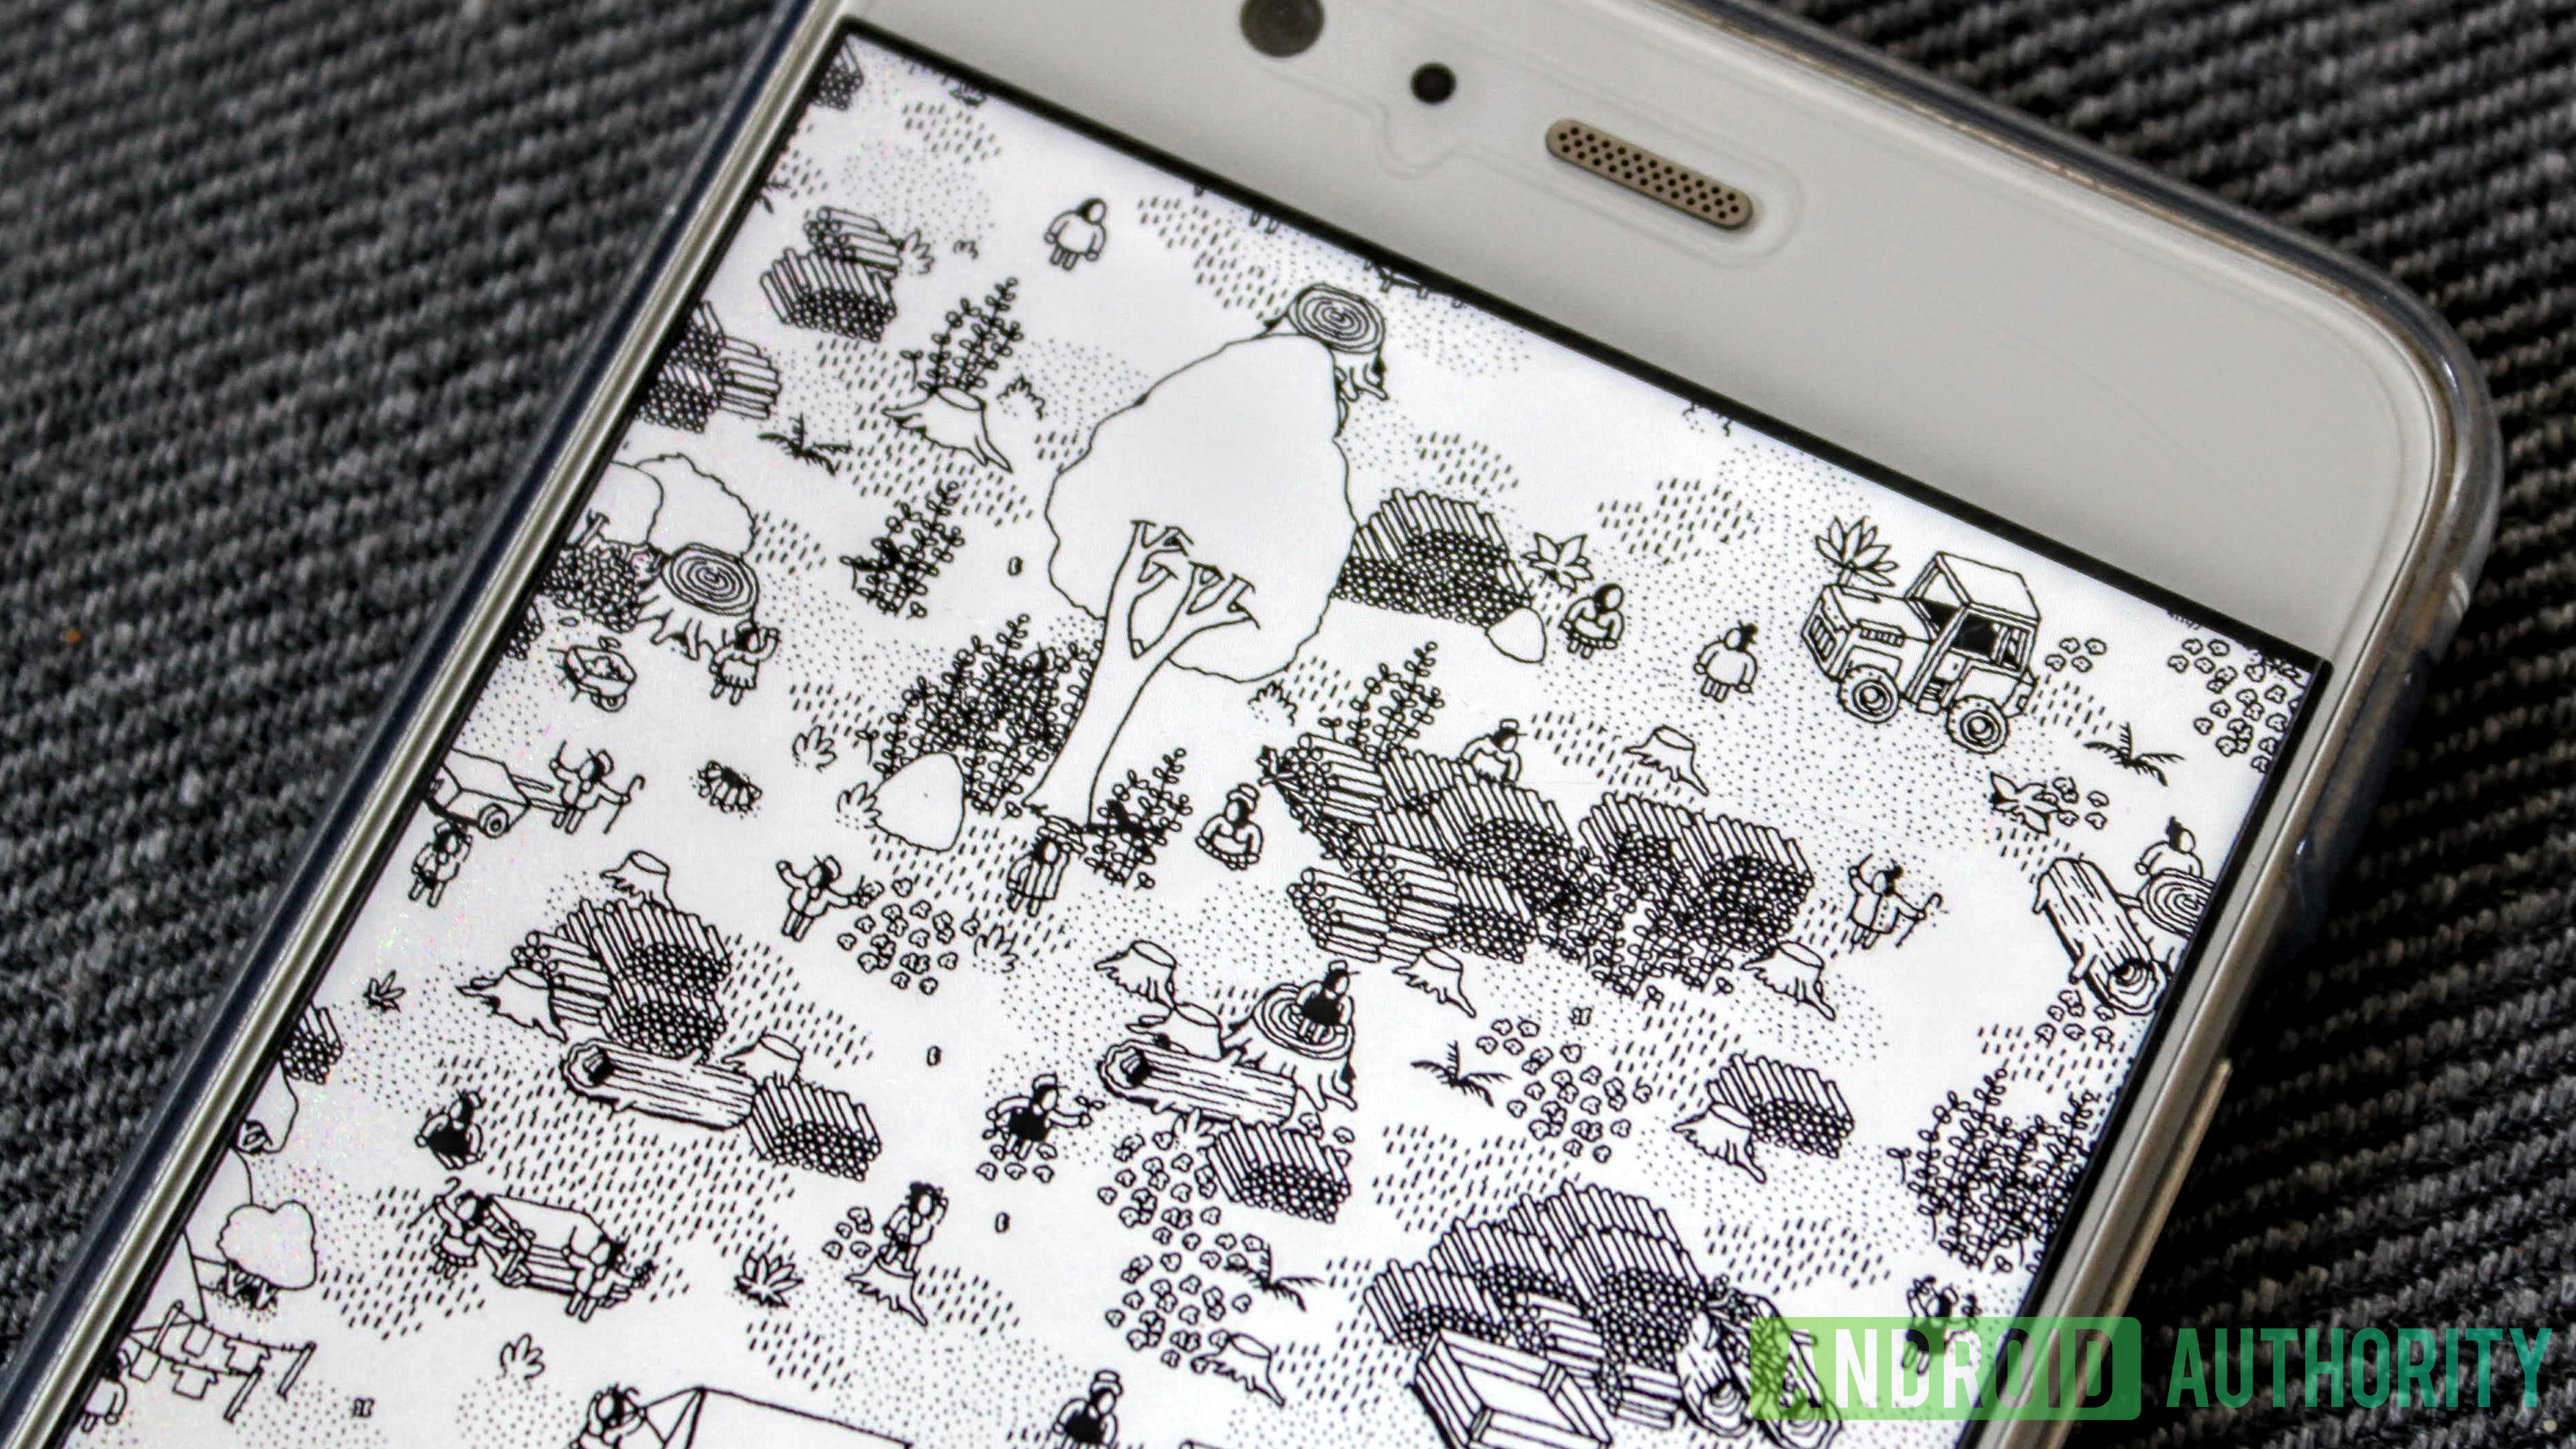 A close-up screenshot from Hidden Folks showing the black and white illustrations.